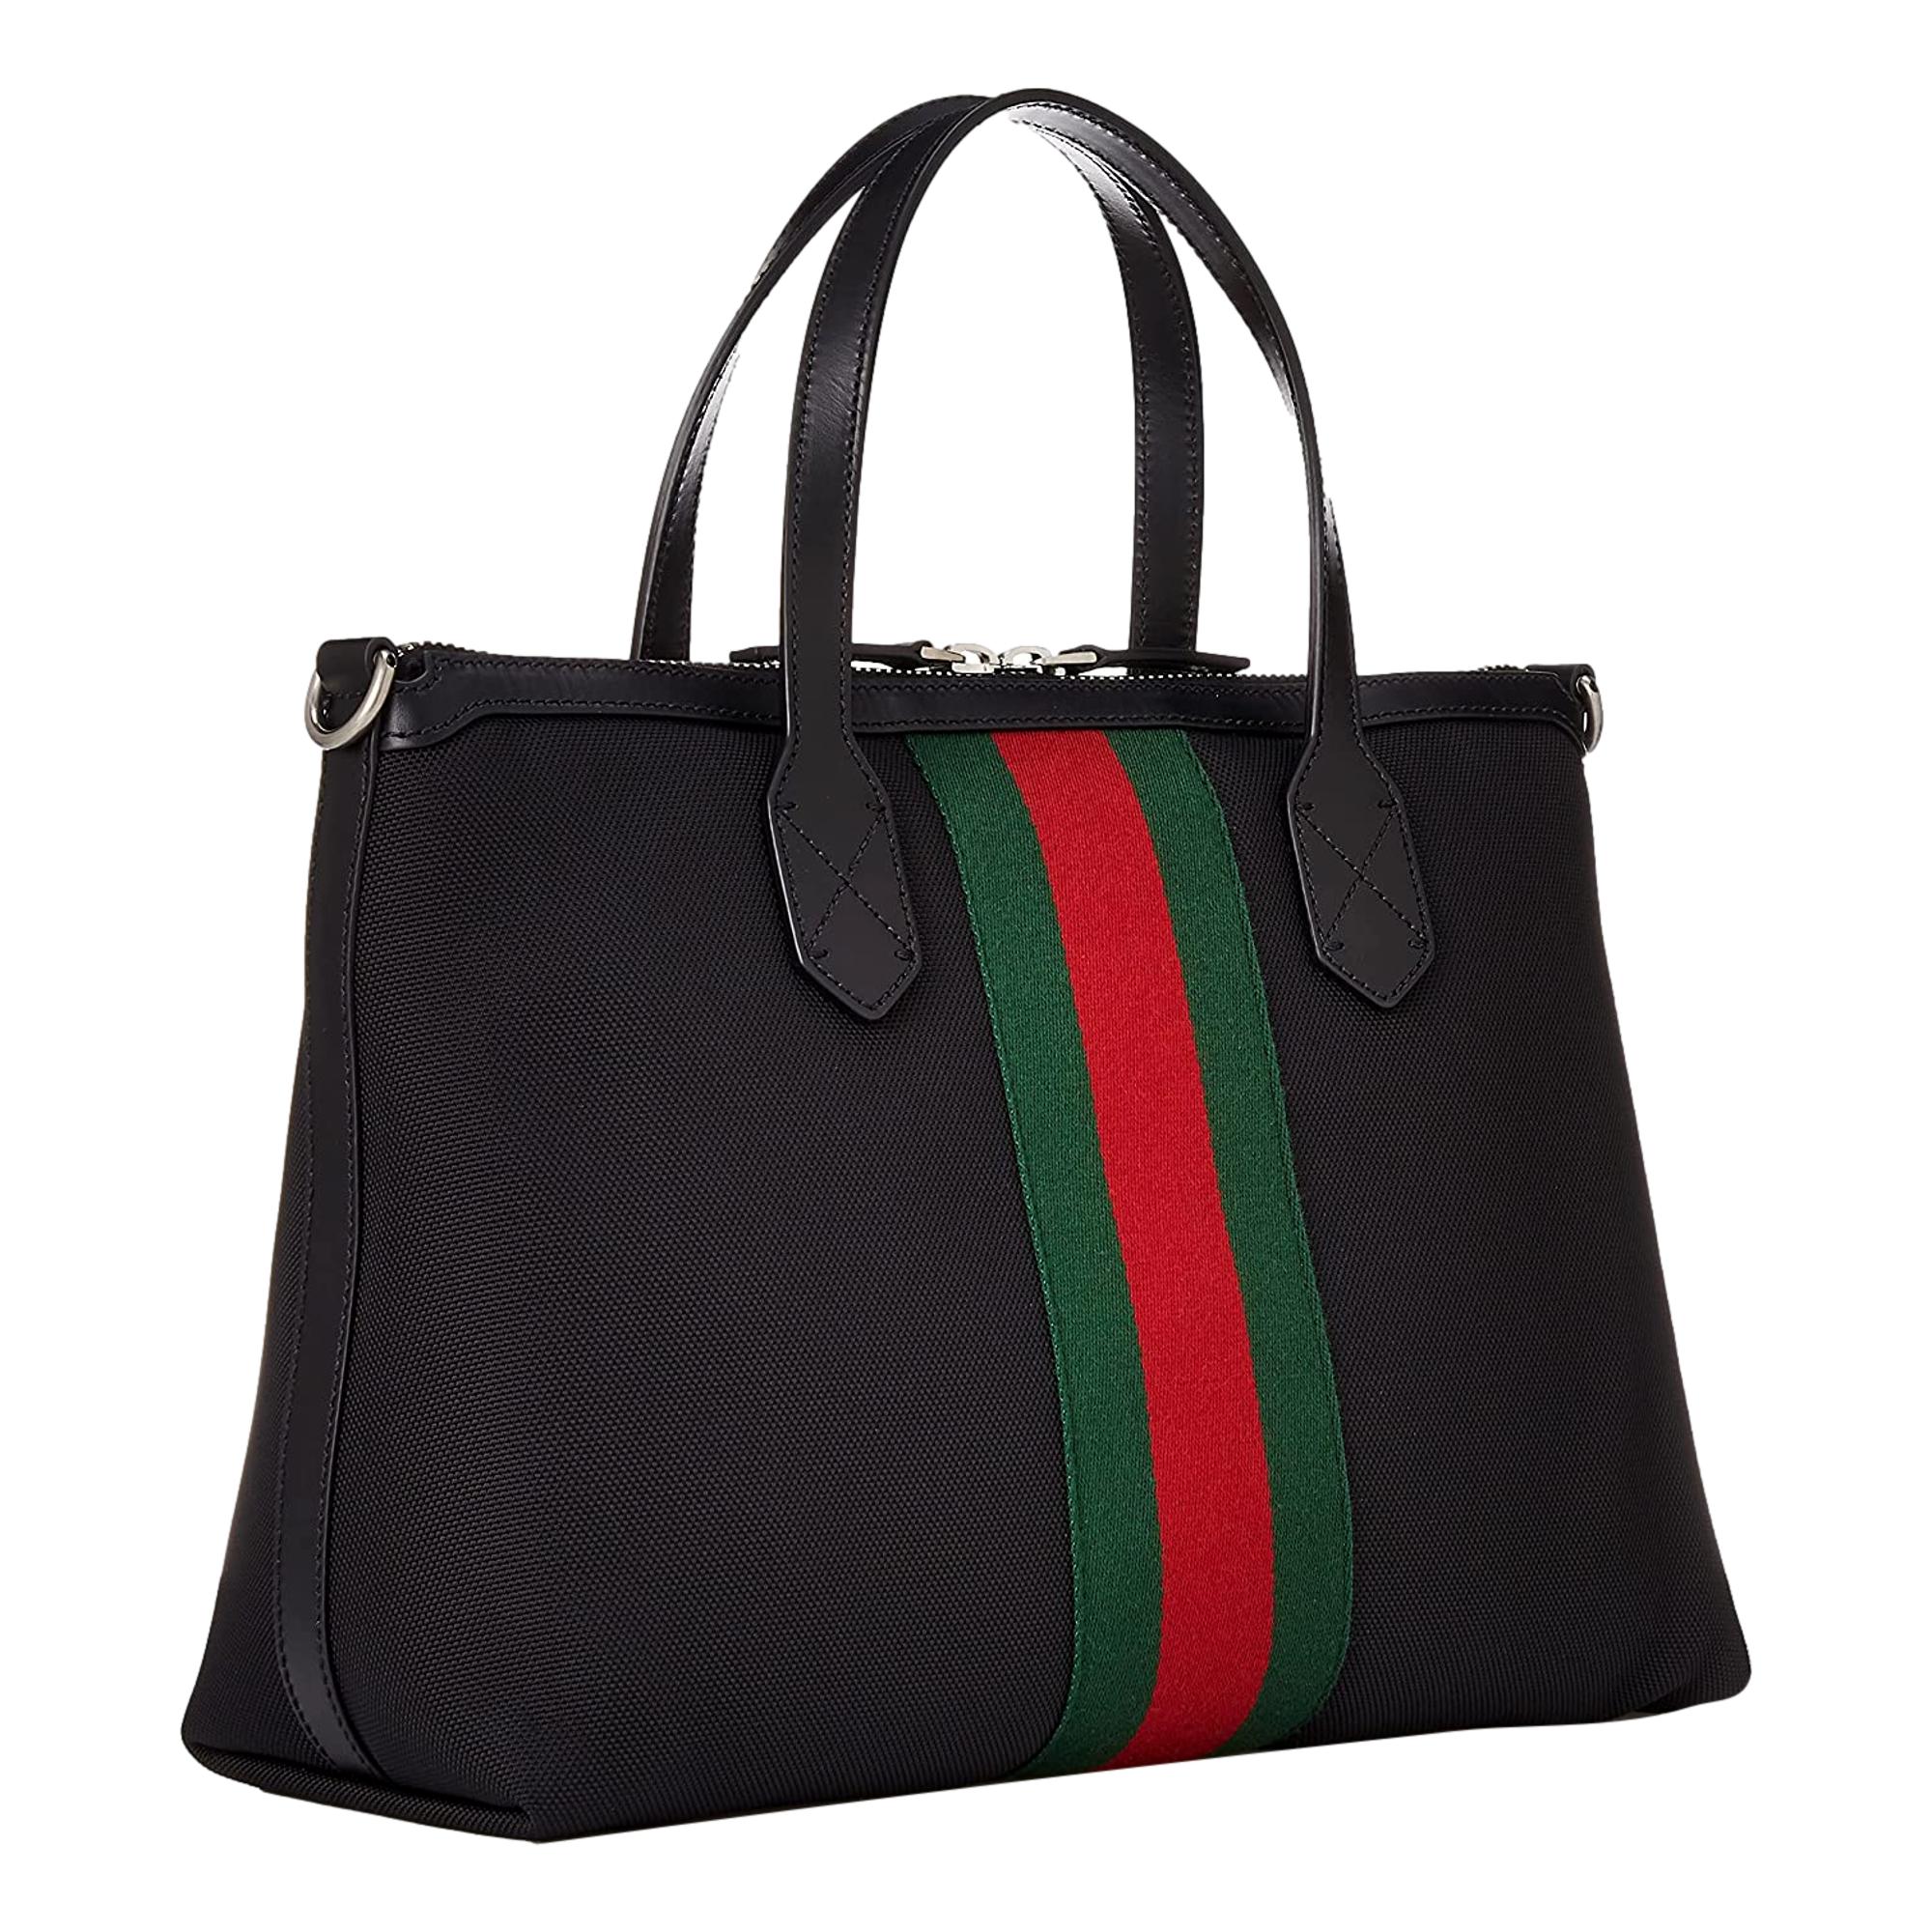 Gucci BLack Canvas Web Stripe Tote Handbag 619750 at_Queen_Bee_of_Beverly_Hills